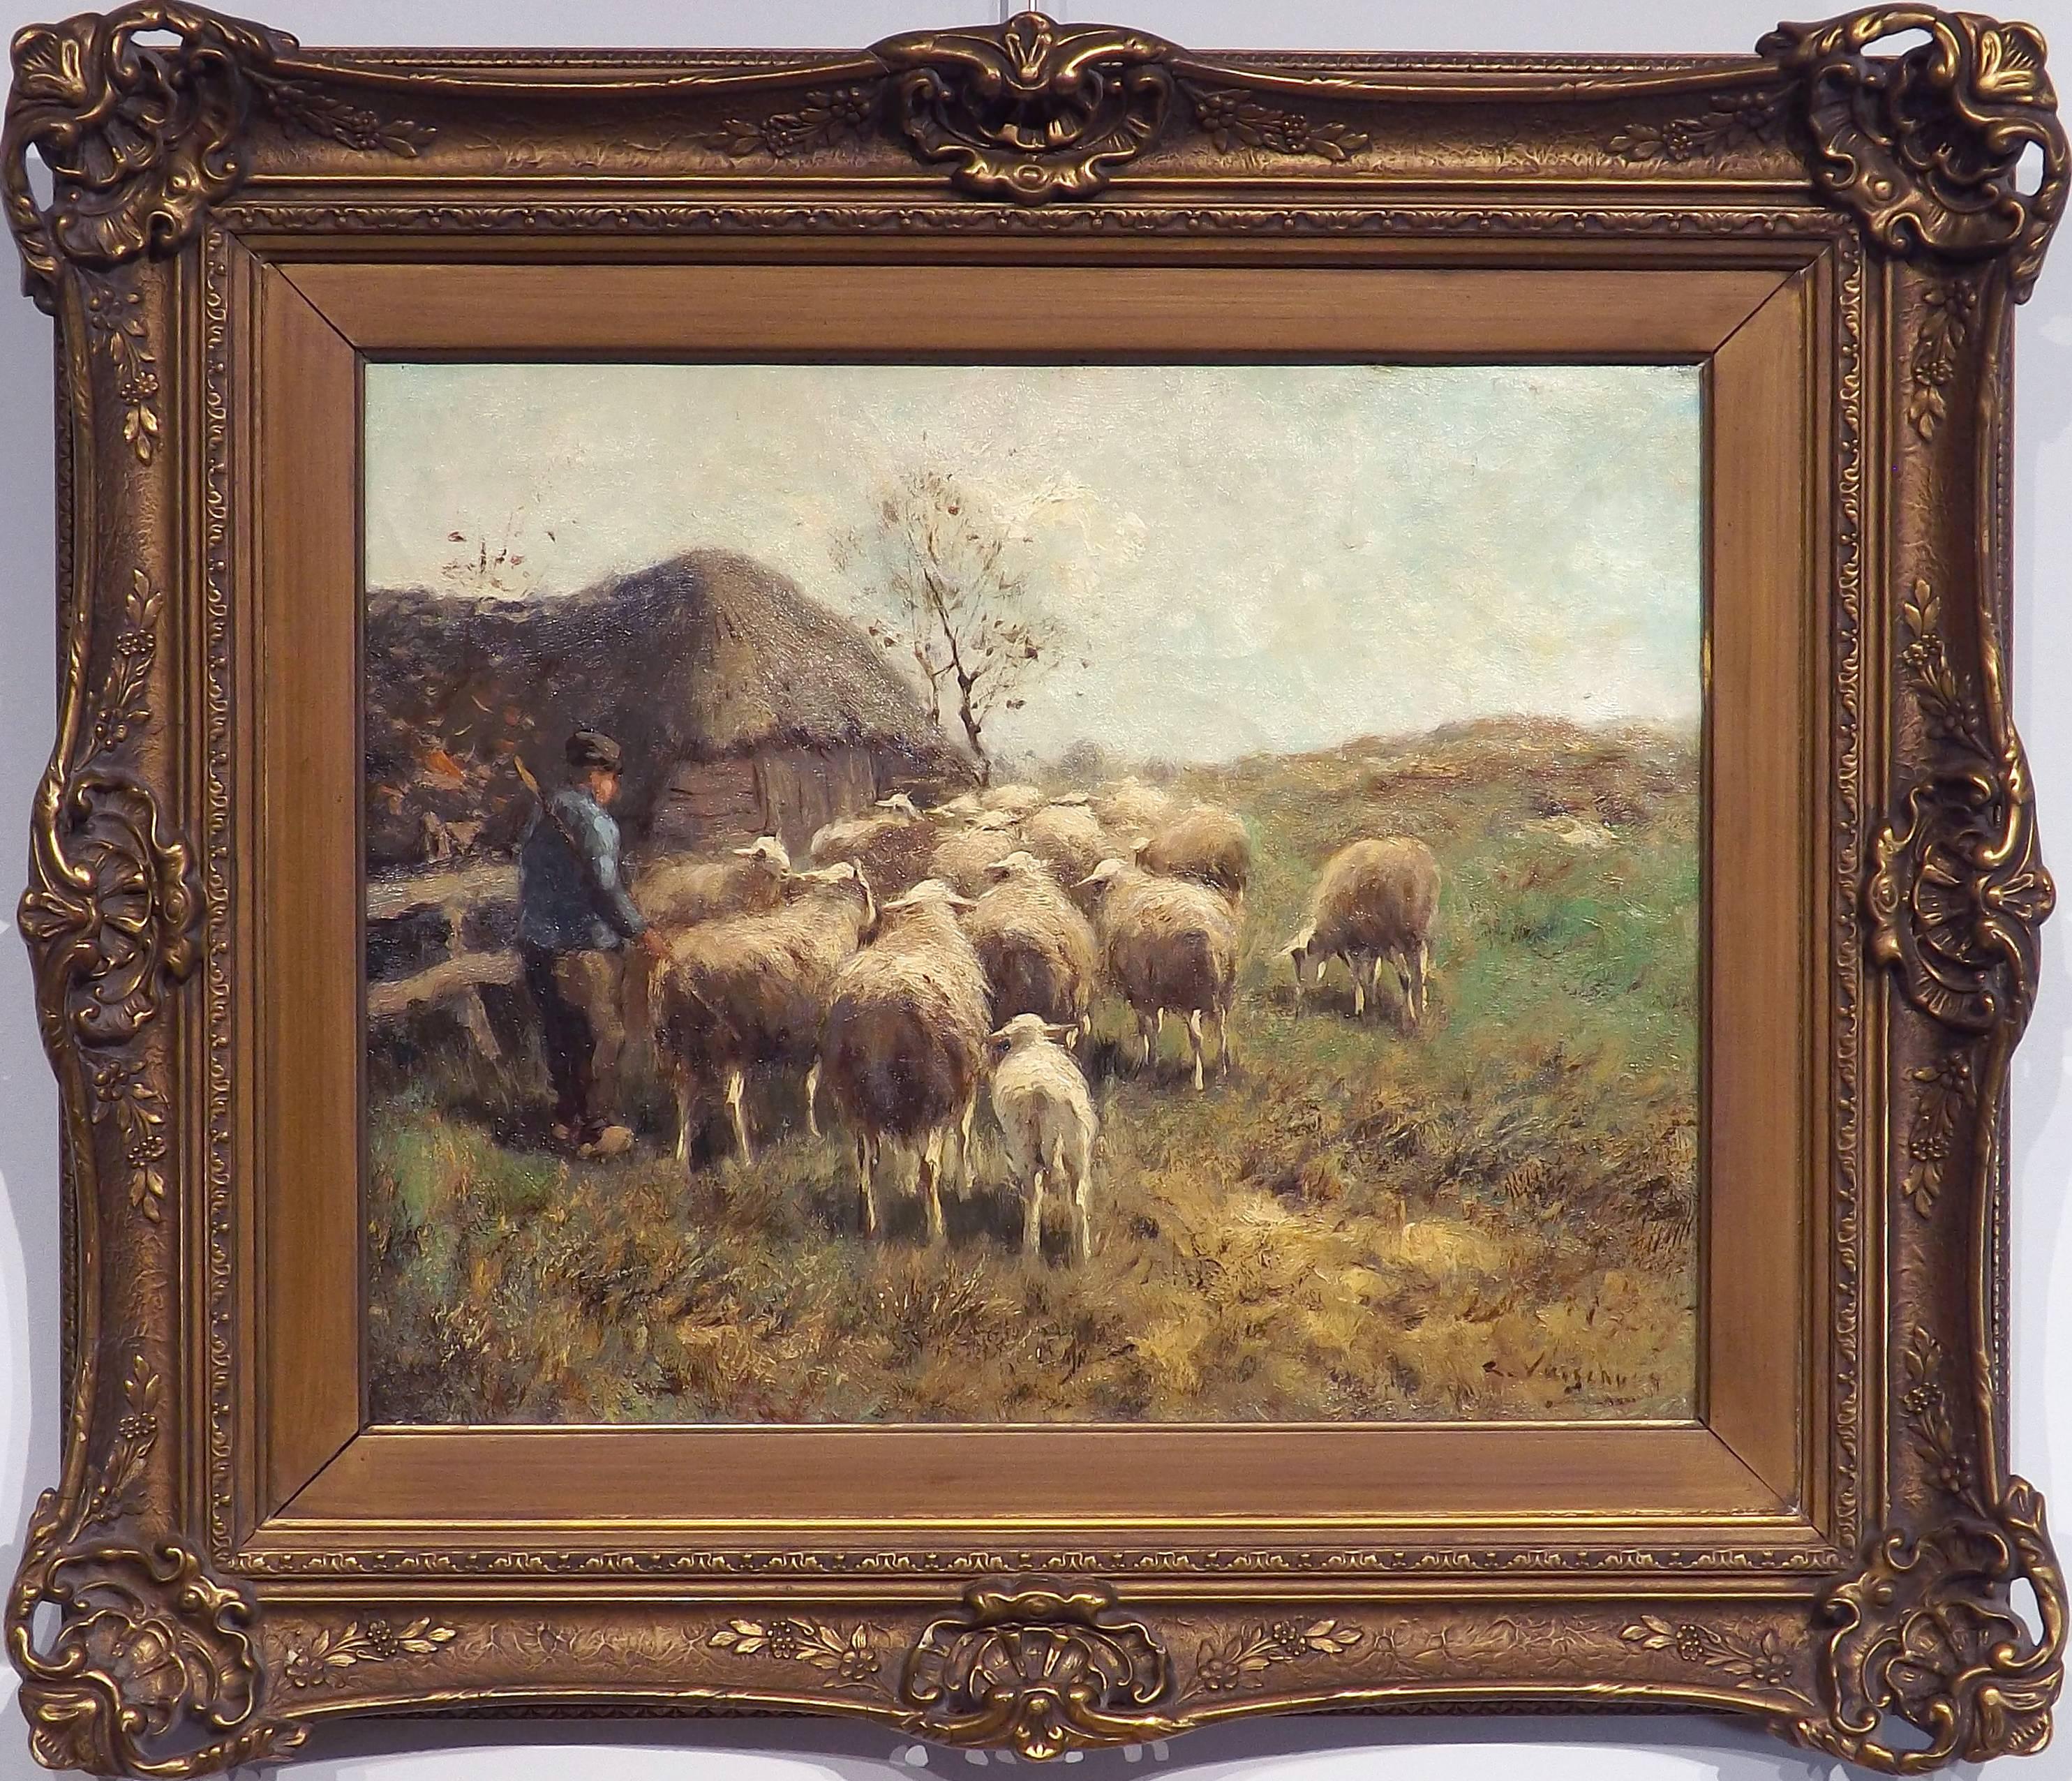 A pleasant painting of a farmer with his herd of sheep by Dutch painter Cornelis Bouter, signed lower right with one of his pseudonyms, 'C. Verschuur'.

Bouter was born in Gouda in 1888, where he worked until 1928. He eventually moved to The